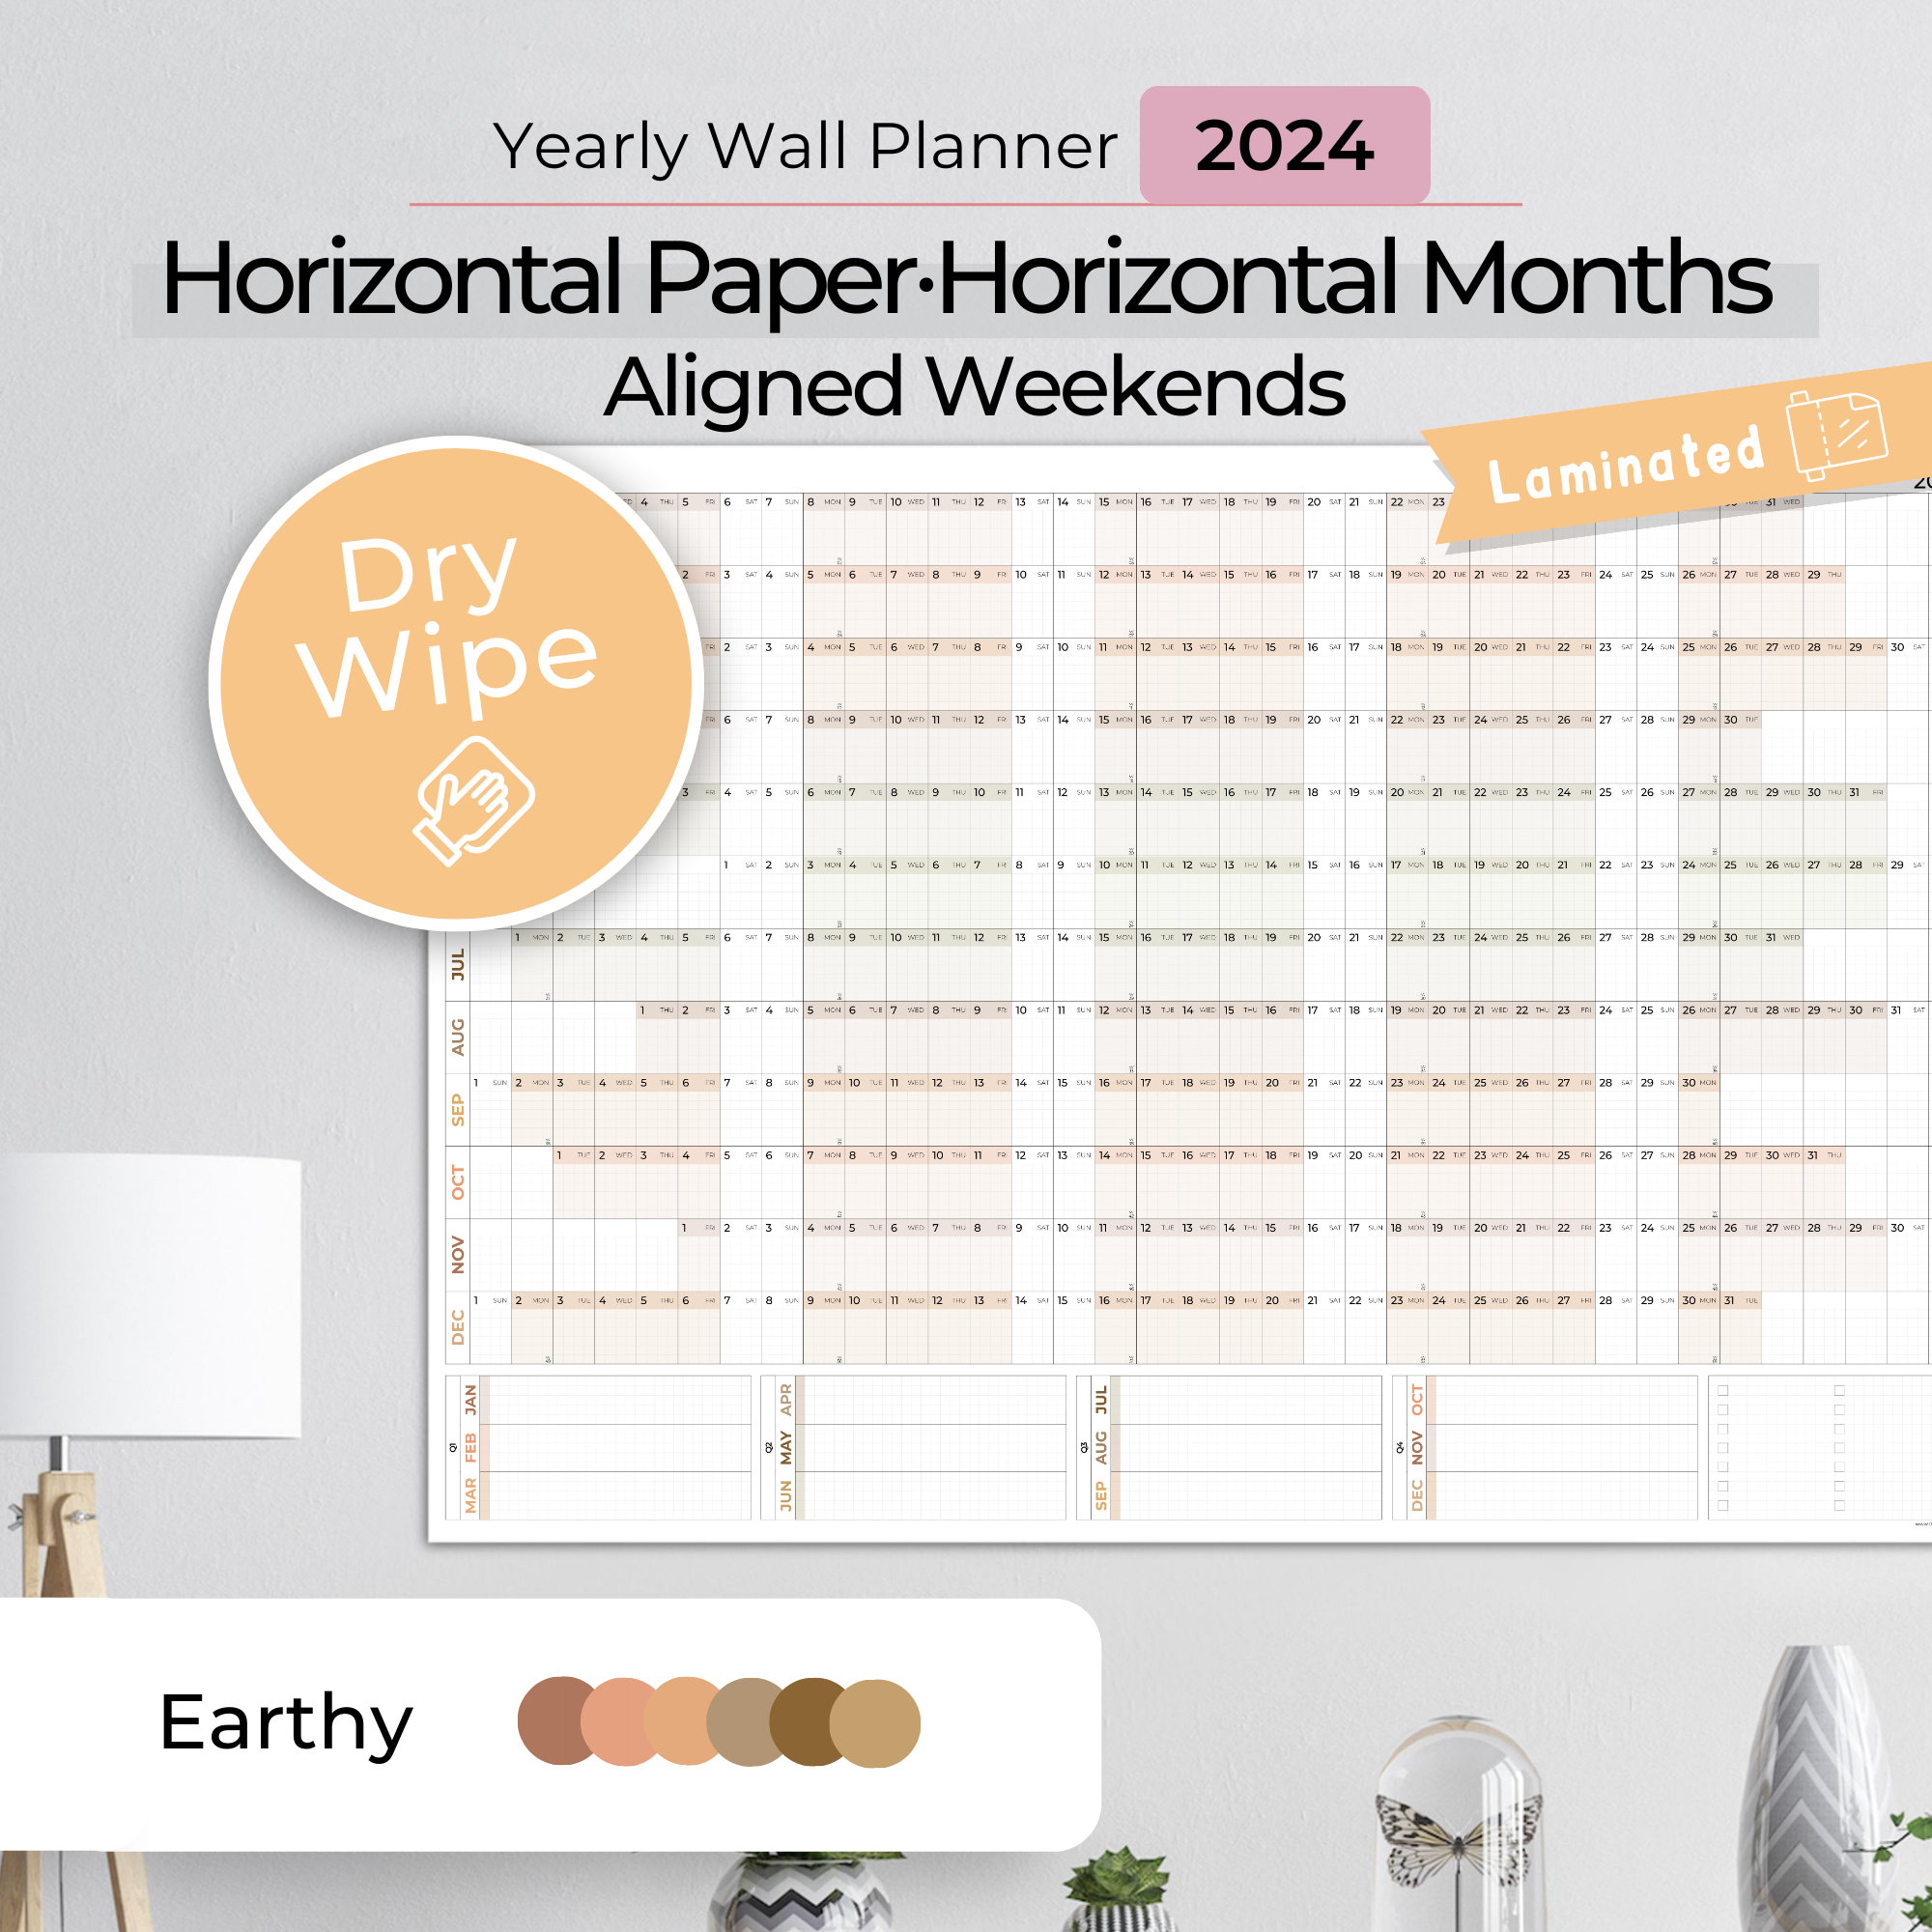 Large Dry Erase Wall Calendar 36 X 96 Undated Blank 2023 Reusable Yearly  Calendar Giant Whiteboard Year Poster Laminated Calendar 